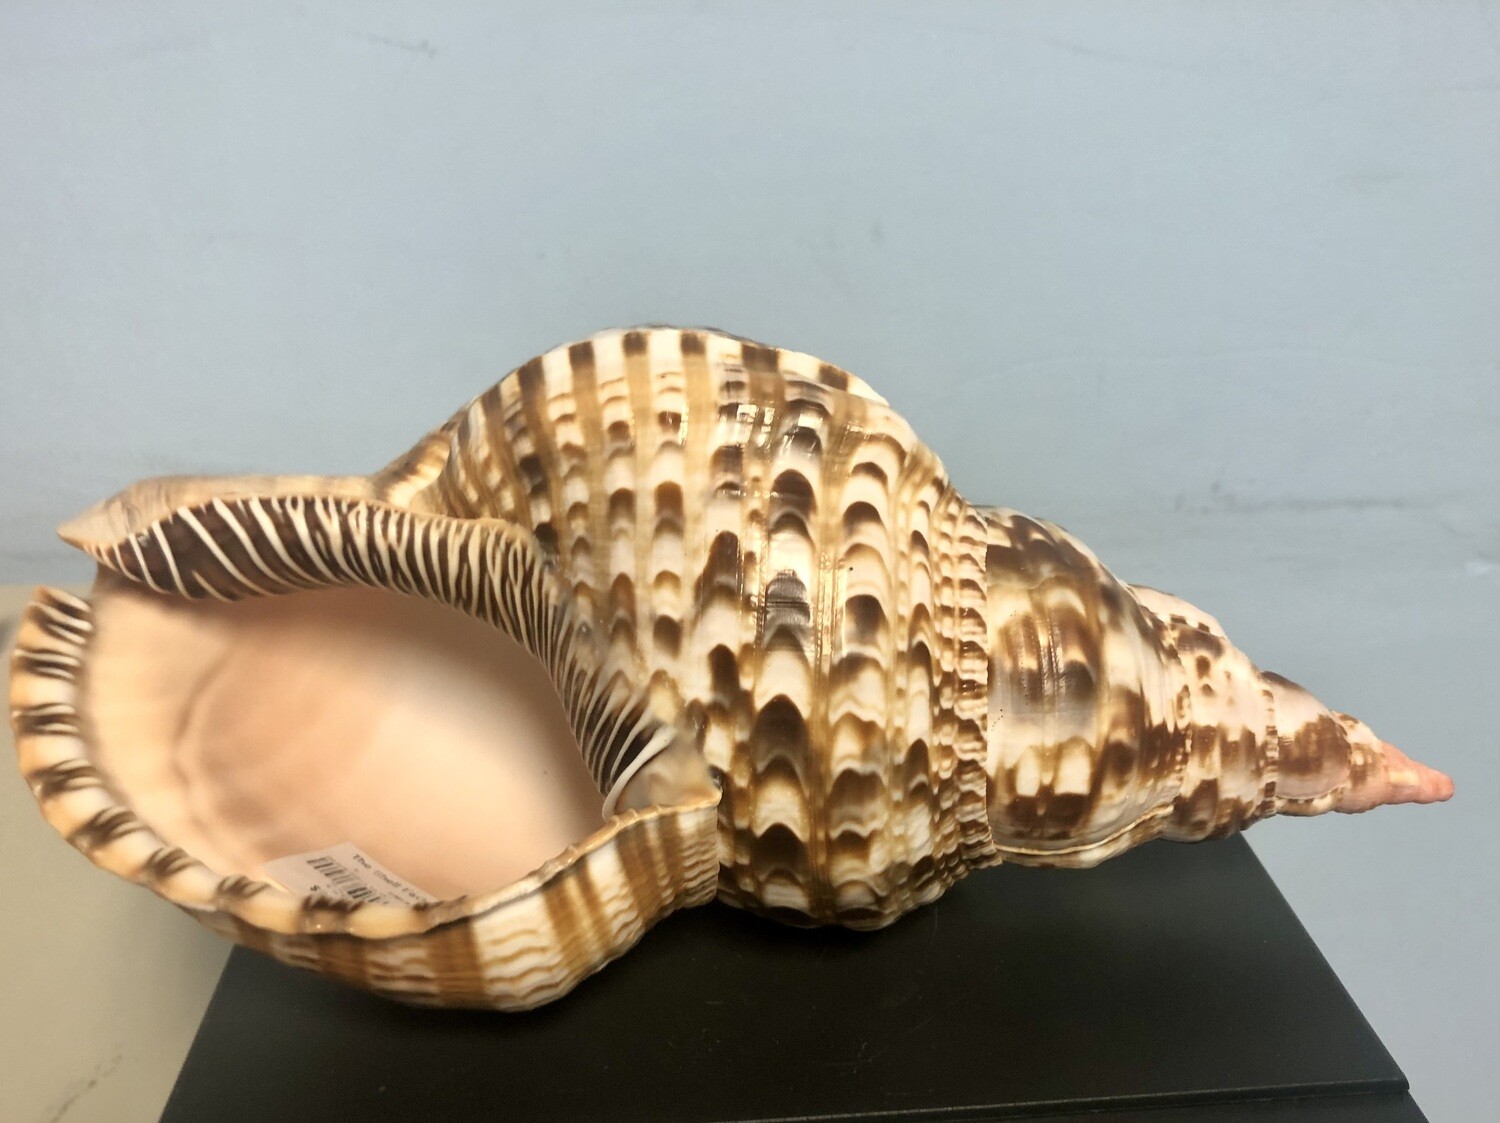 Triton Seashell - One of our Most Beautiful Shells (10-11")